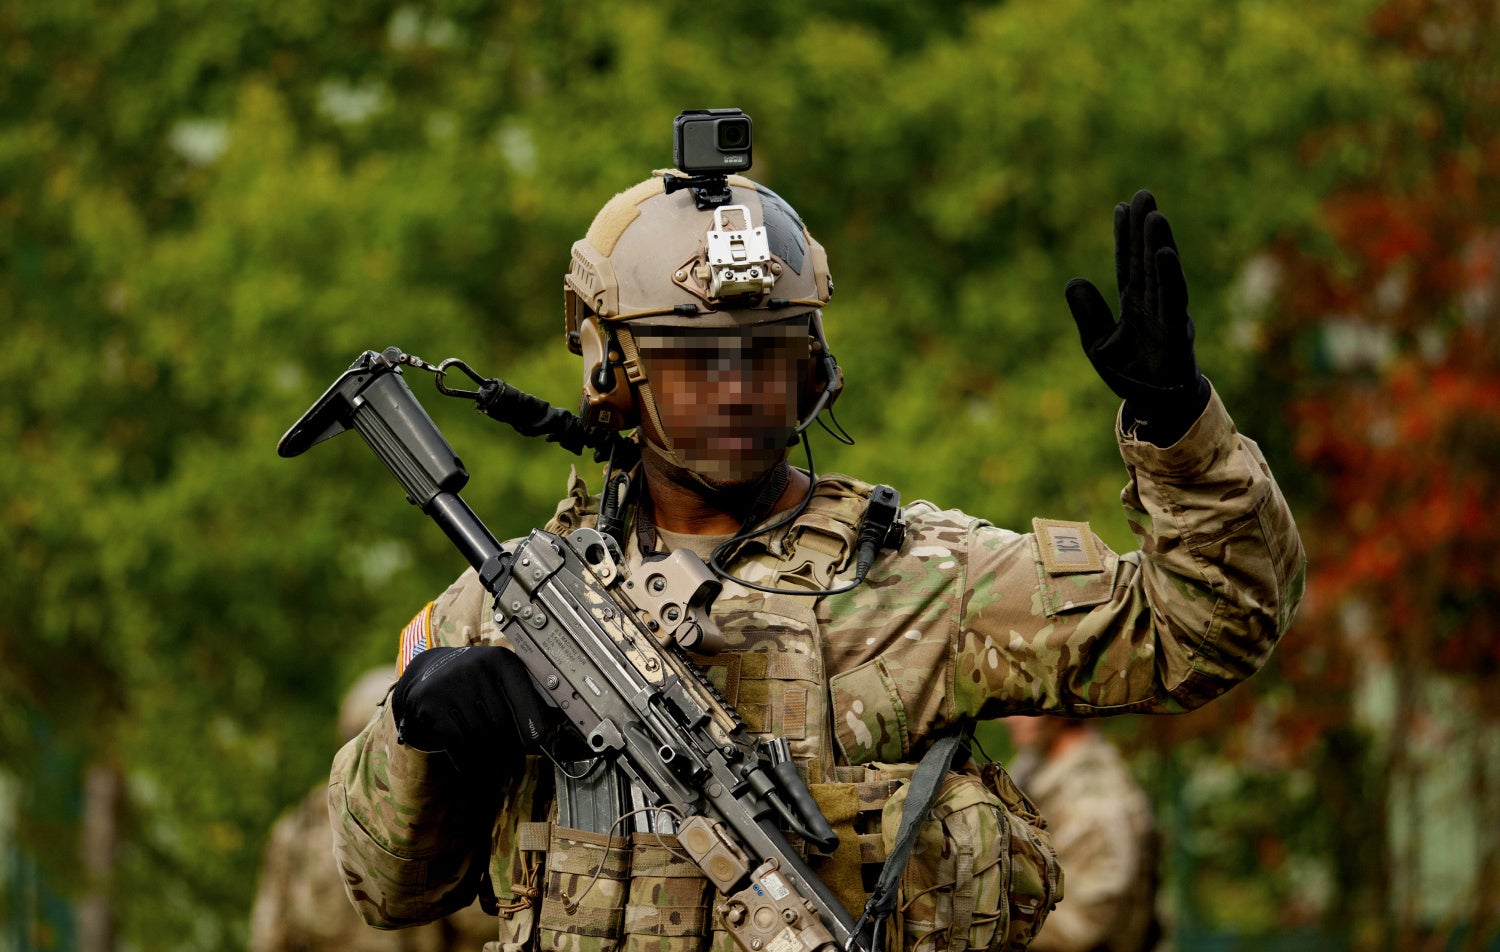 POTD: U.S. Special Forces in Germany